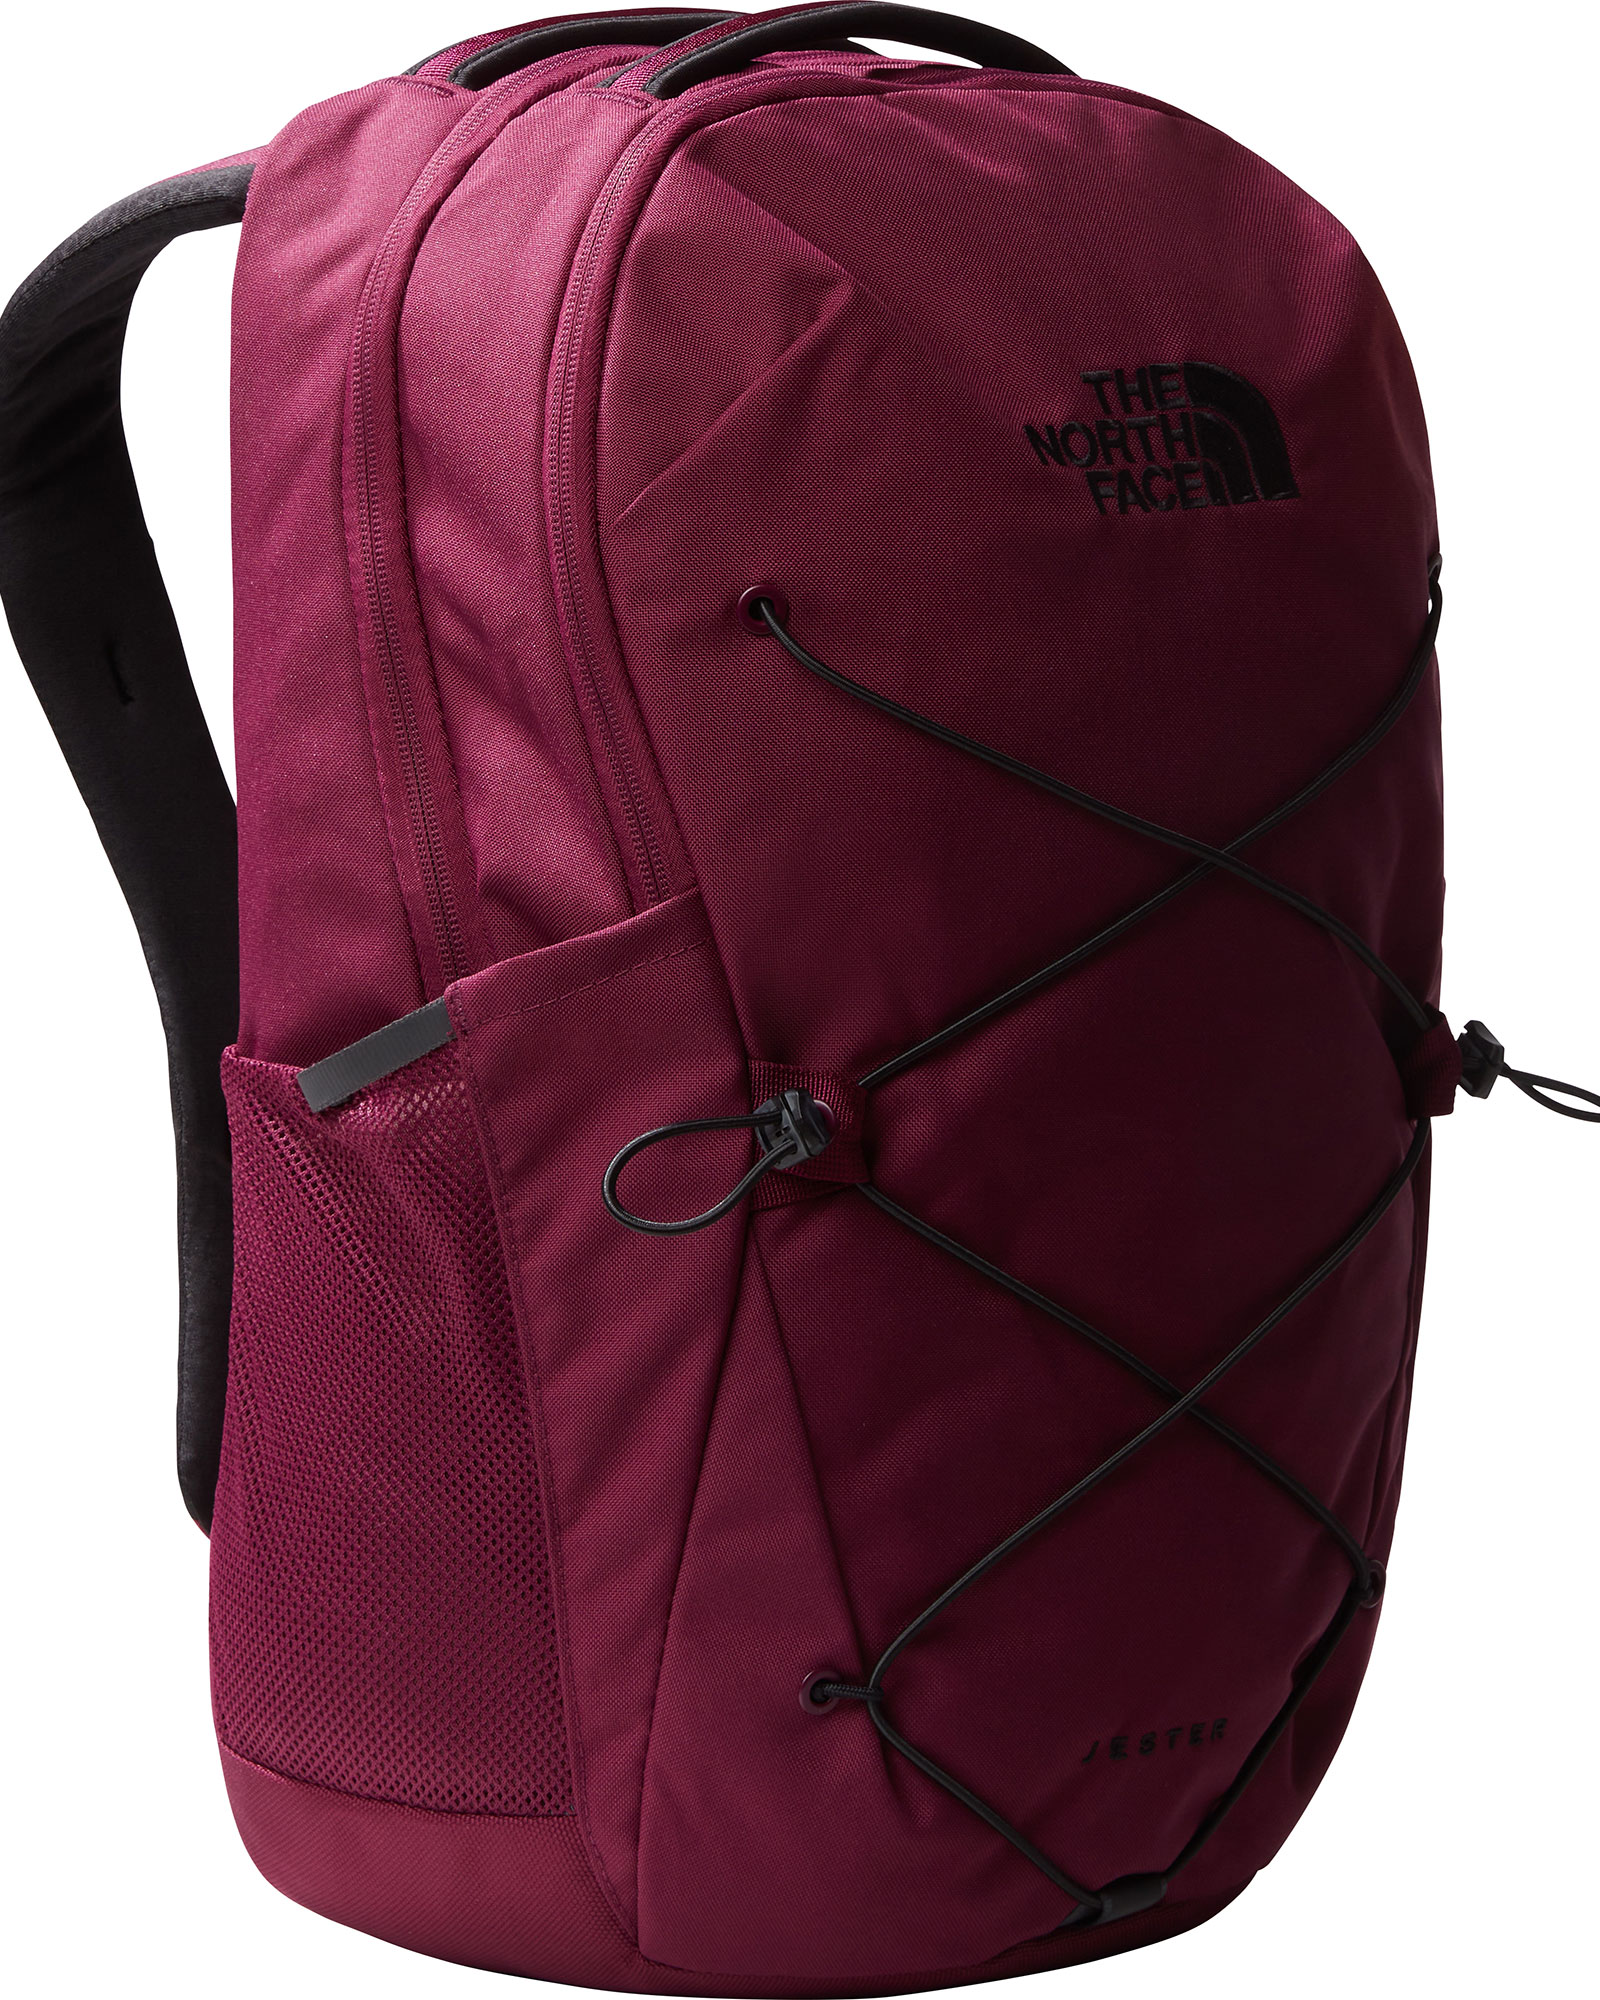 The North Face Jester Backpack - Boysenberry/TNF Black